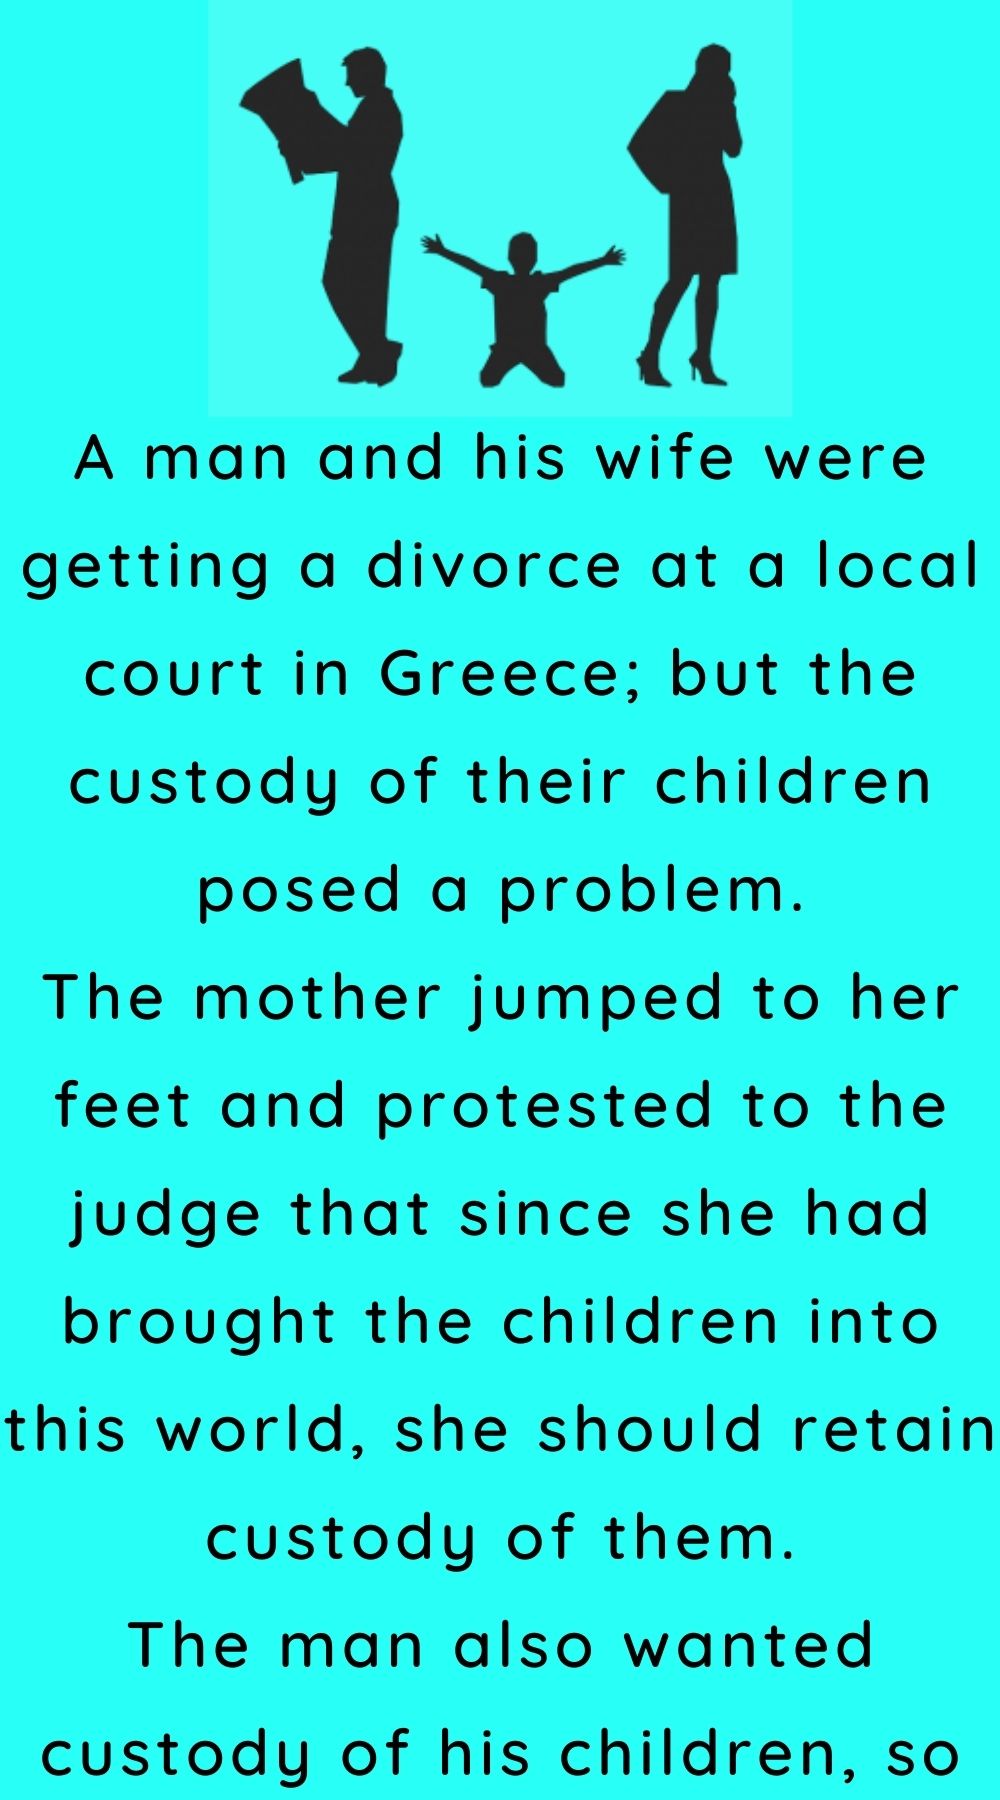 A man and his wife were getting a divorce